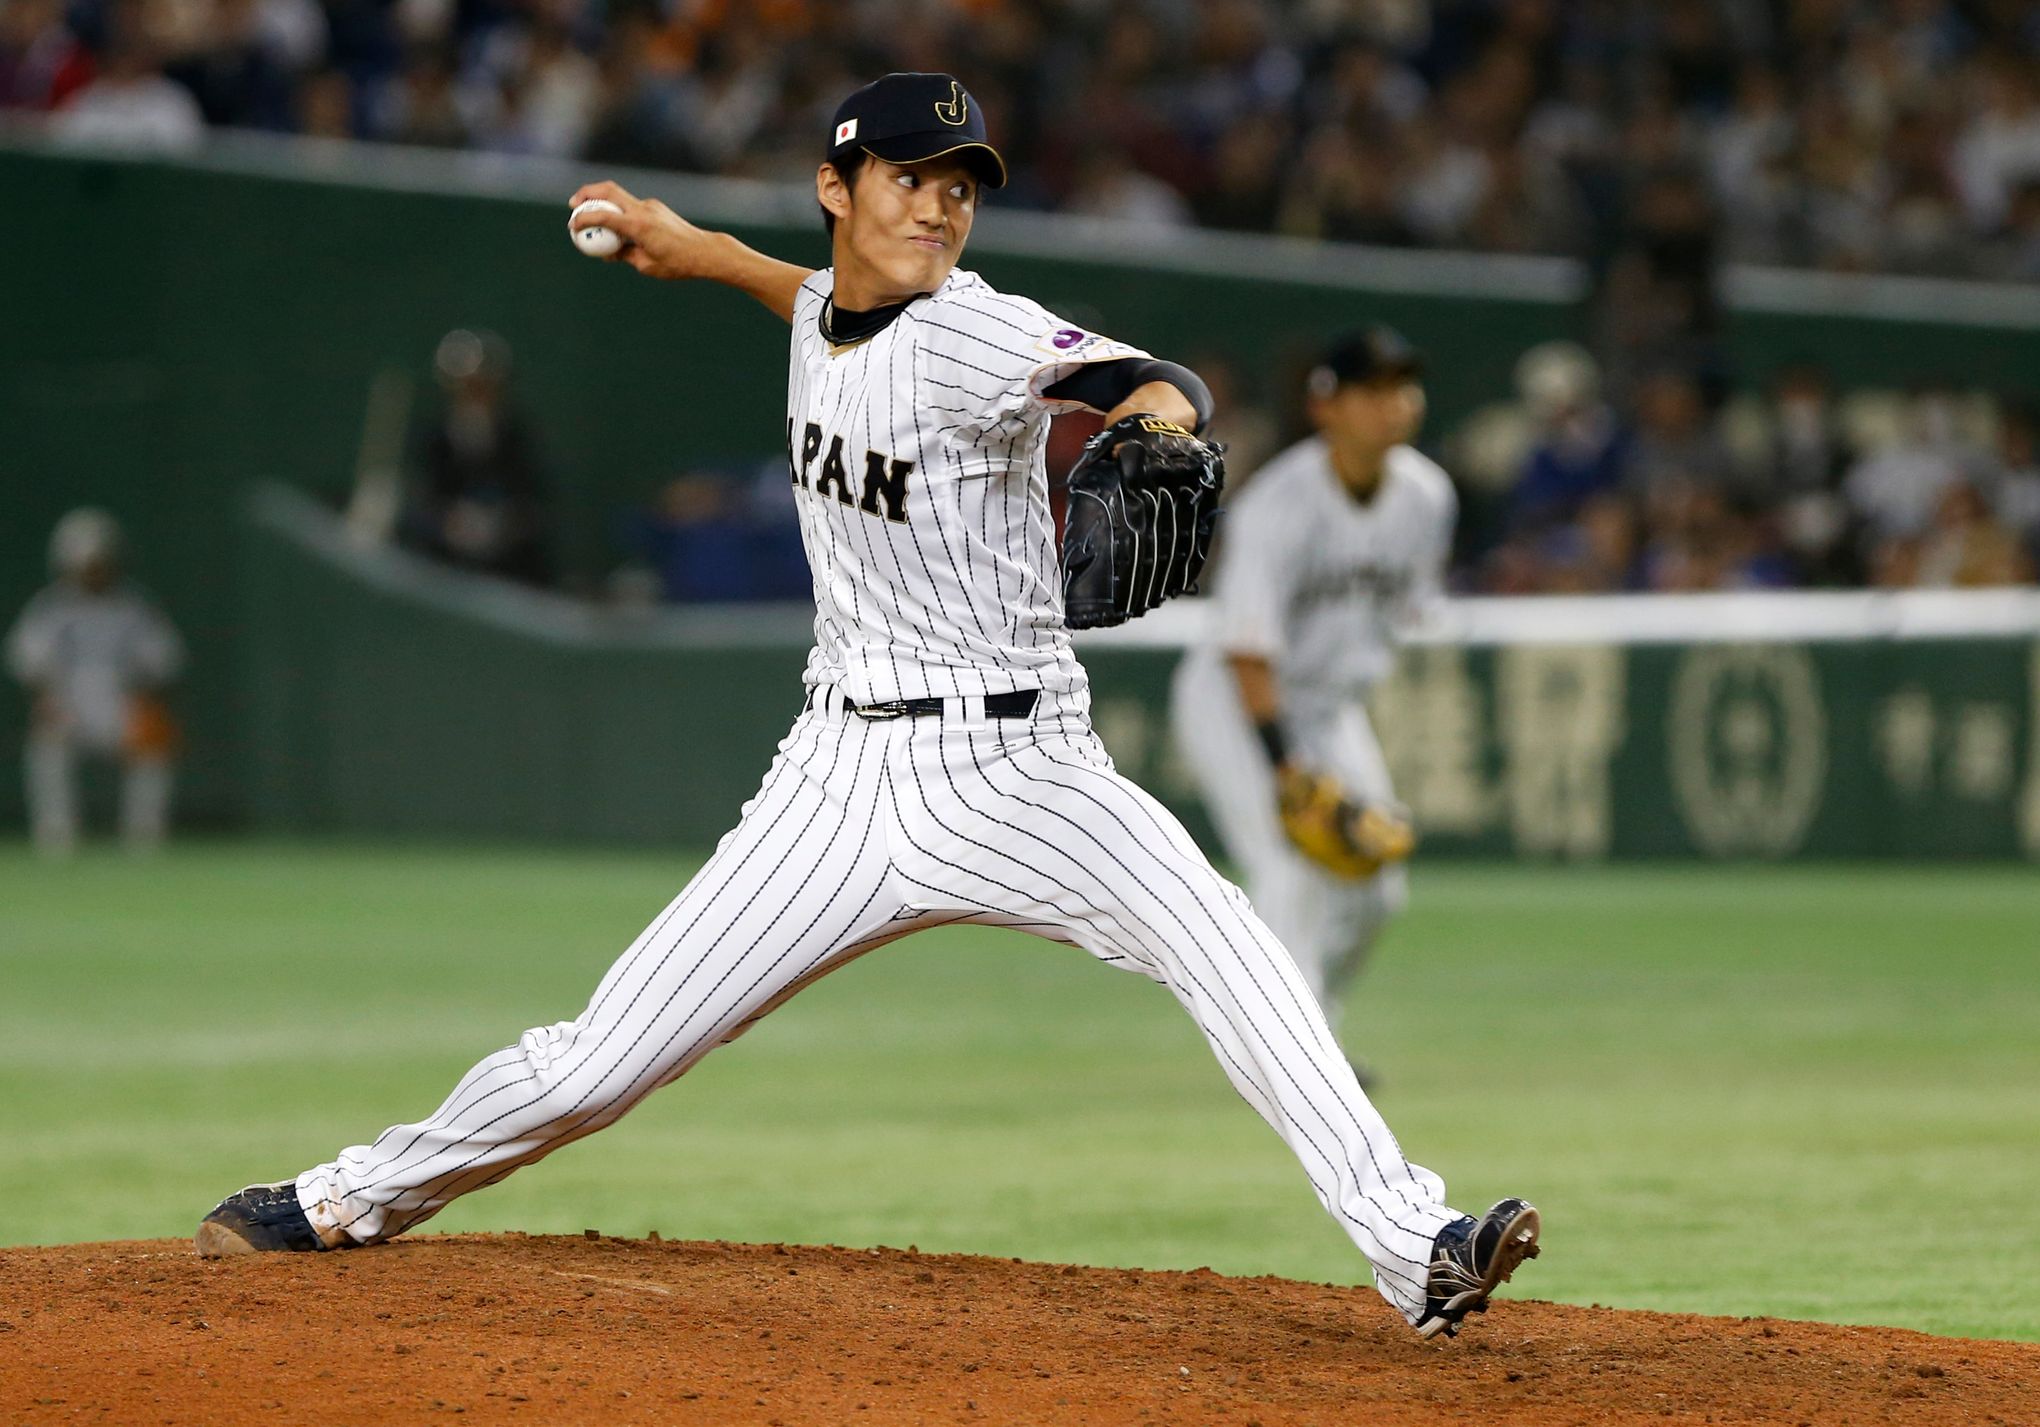 AP source: Japanese right-hander Fujinami agrees with A's